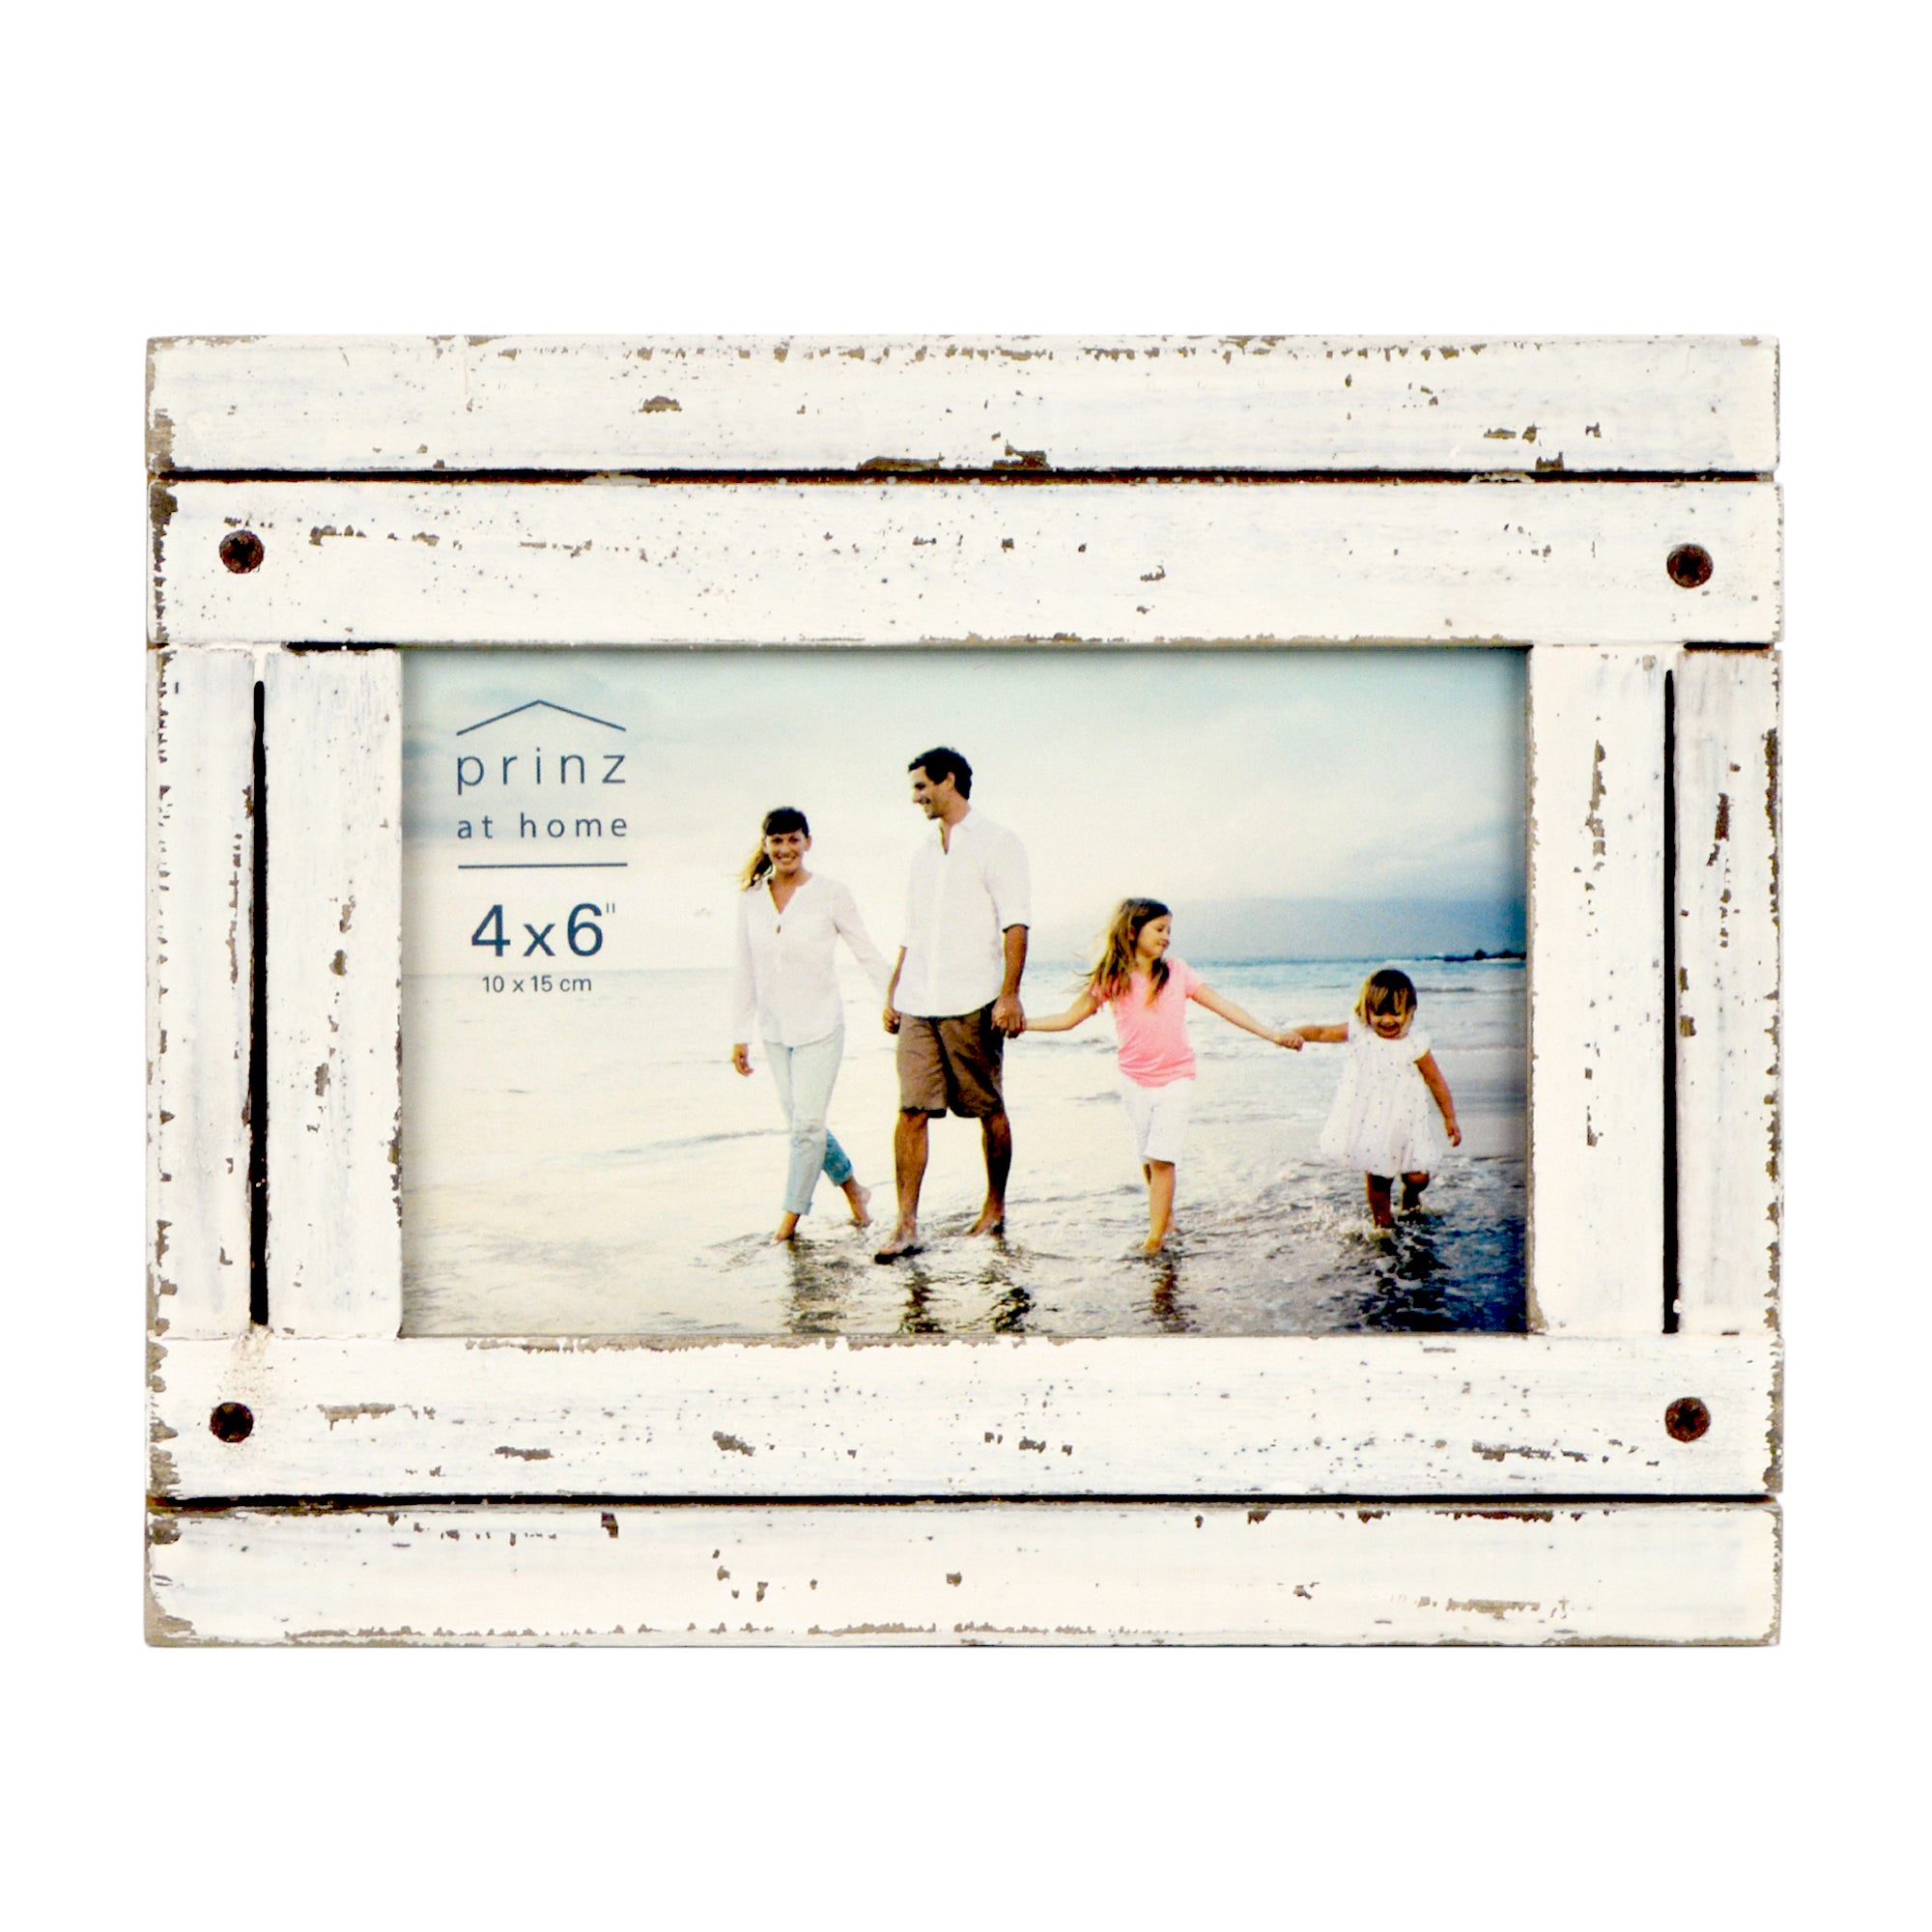 How to buy a digital photo frame: the six key things to look for